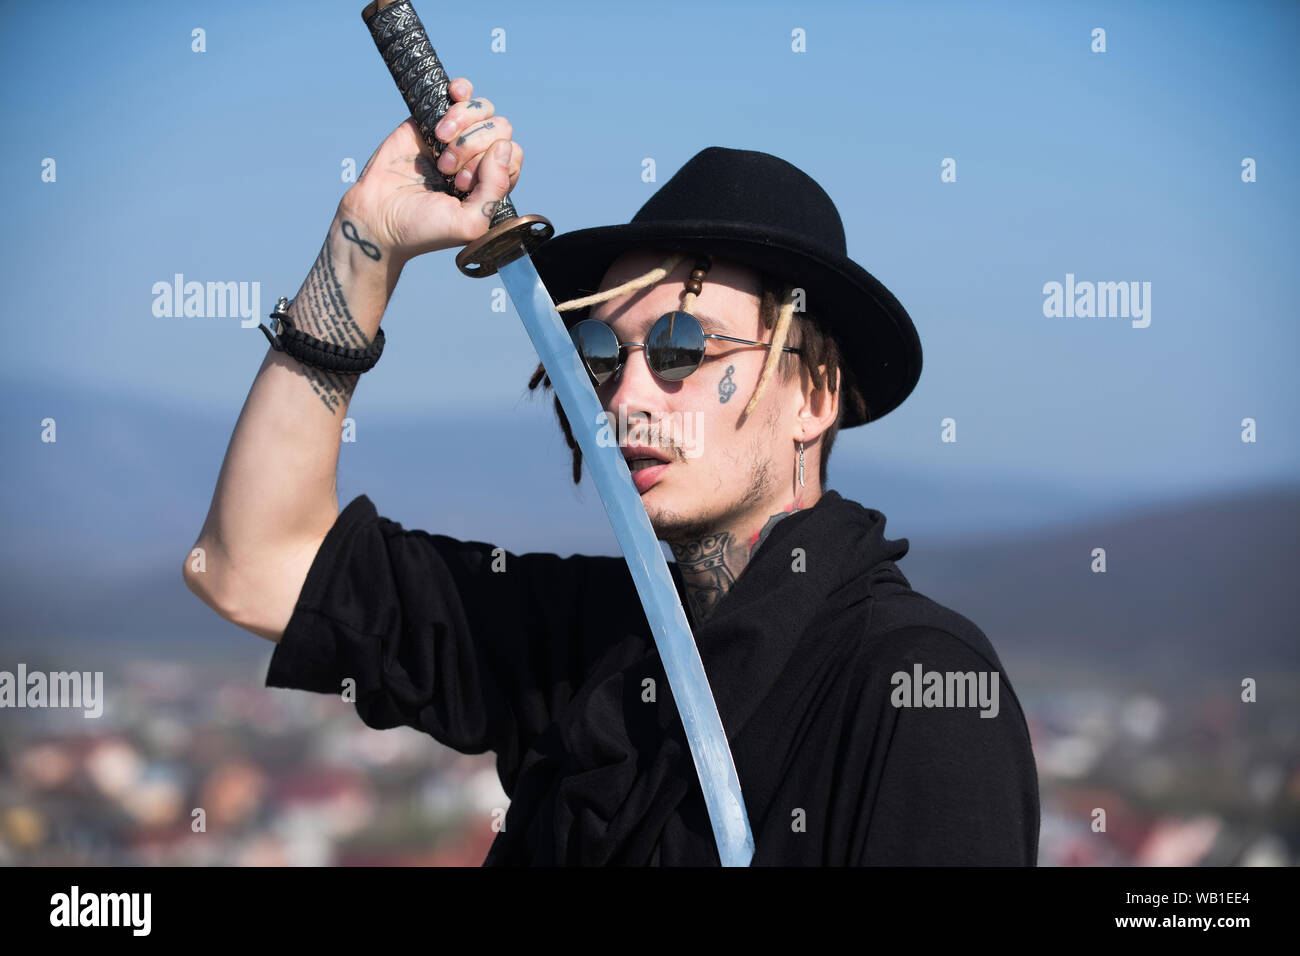 Defense, power, honor, force. Samurai with japan katana weapon outdoors. Man holding sword with metal blade on blue sky. Martial arts concept. Warrior Stock Photo